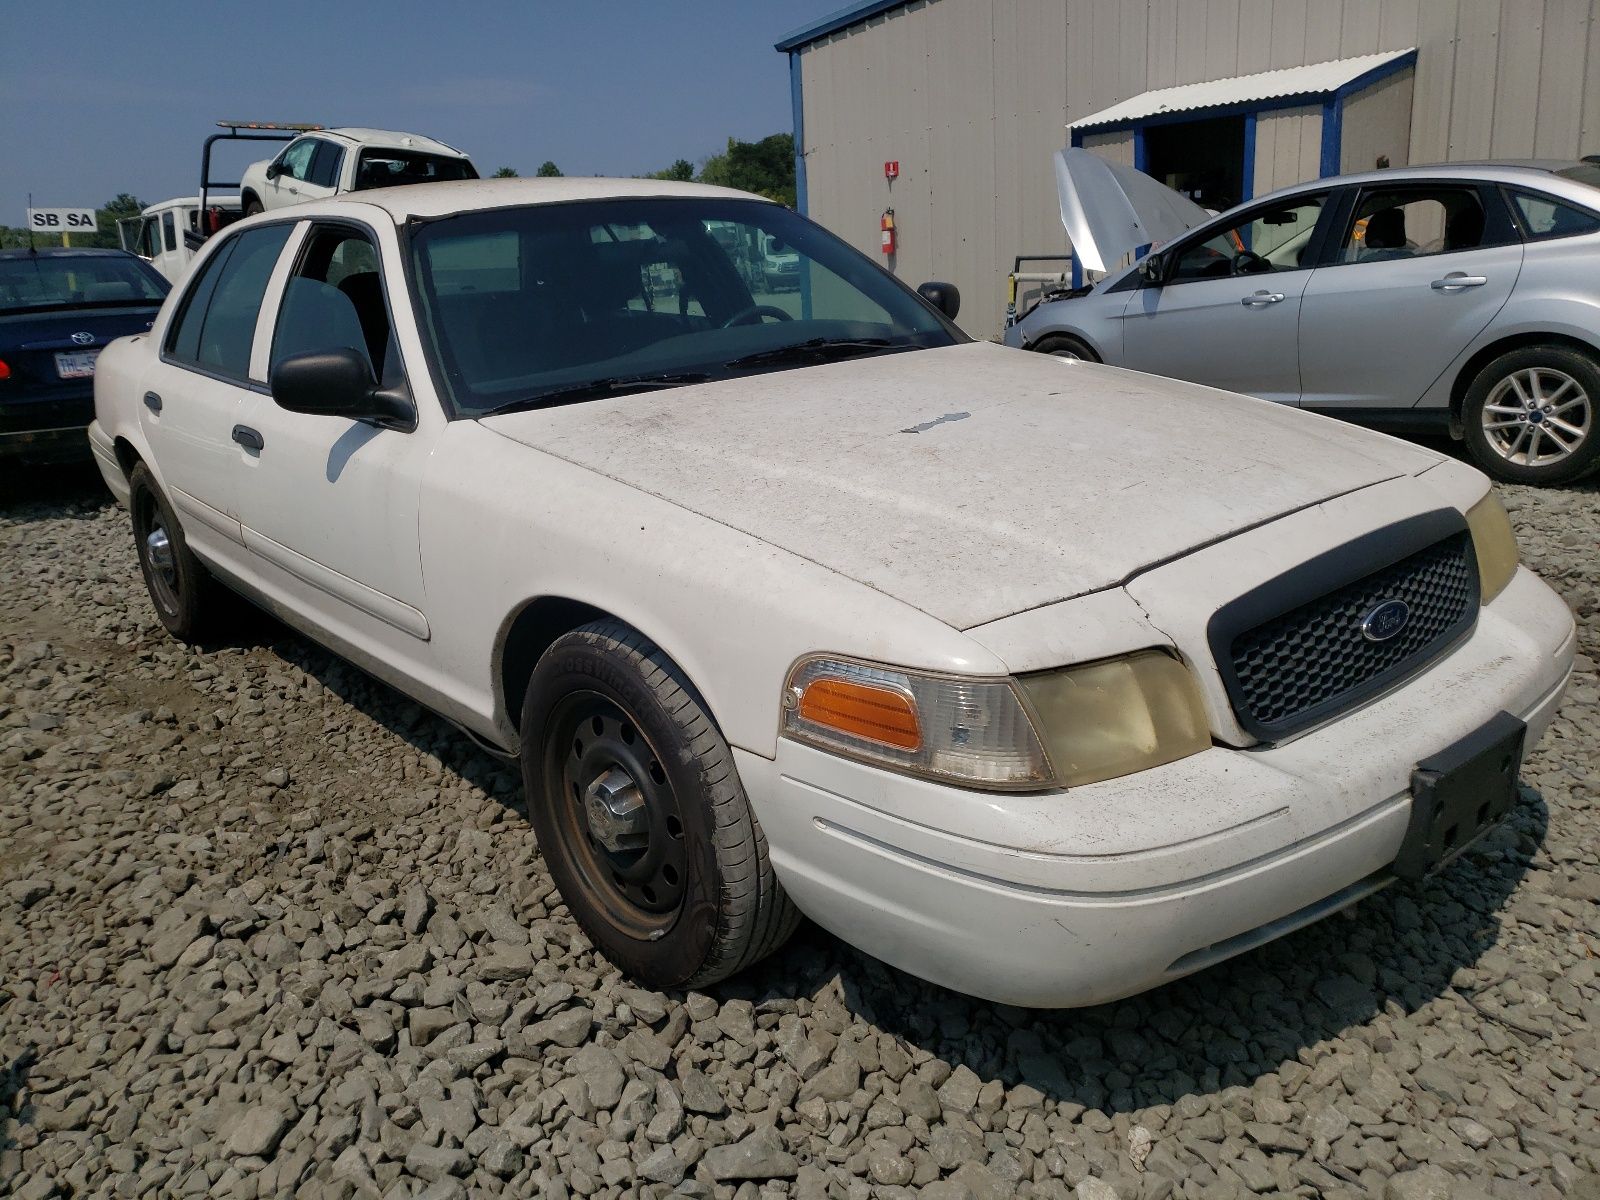 1 of 2FAFP71W03X139140 Ford Crown Victoria 2003